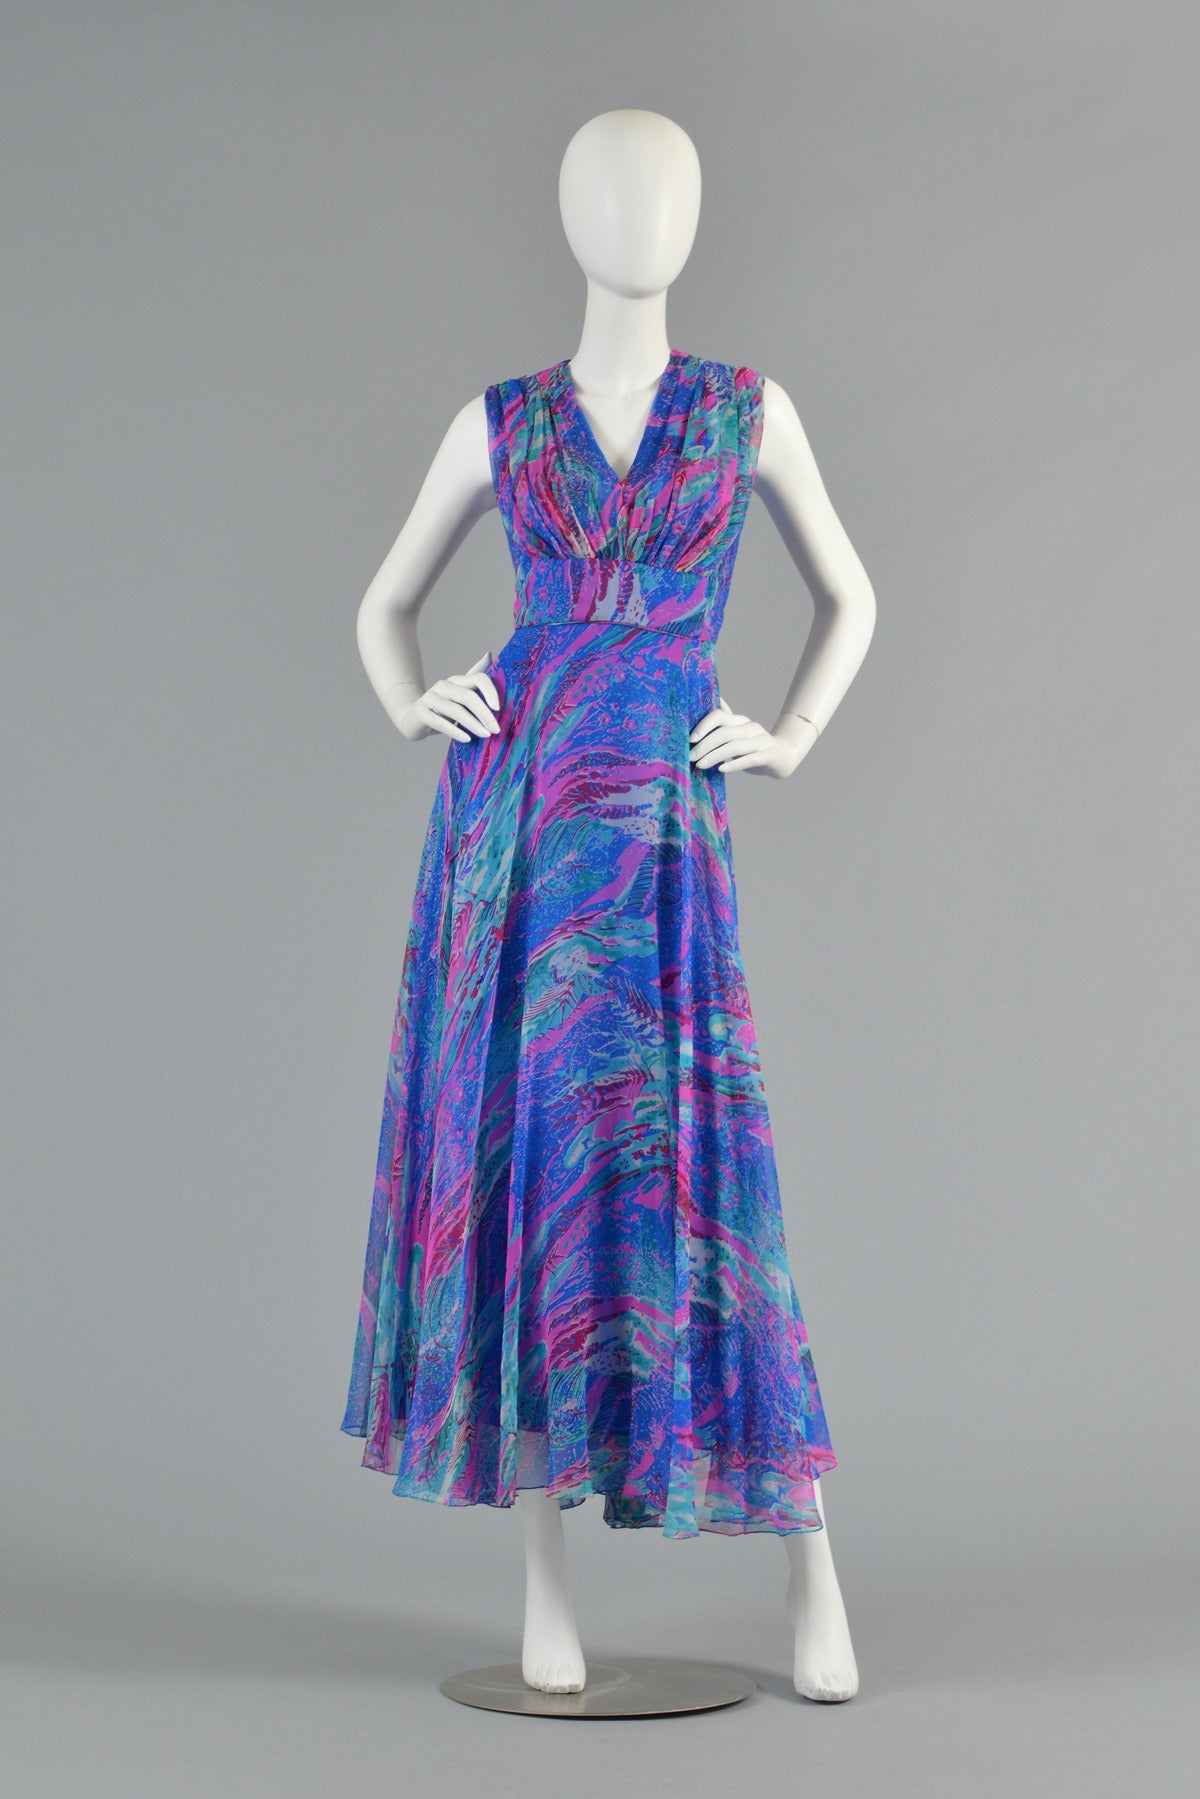 Absolutely awesome 1960's silk chiffon maxi dress. BEAUTIFUL piece and perfect for any spring or summer event! Painterly swirled pattern in shades of blue, lavender and aqua silk chiffon. Gathered bodice with plunging neckline and bias-cut flared